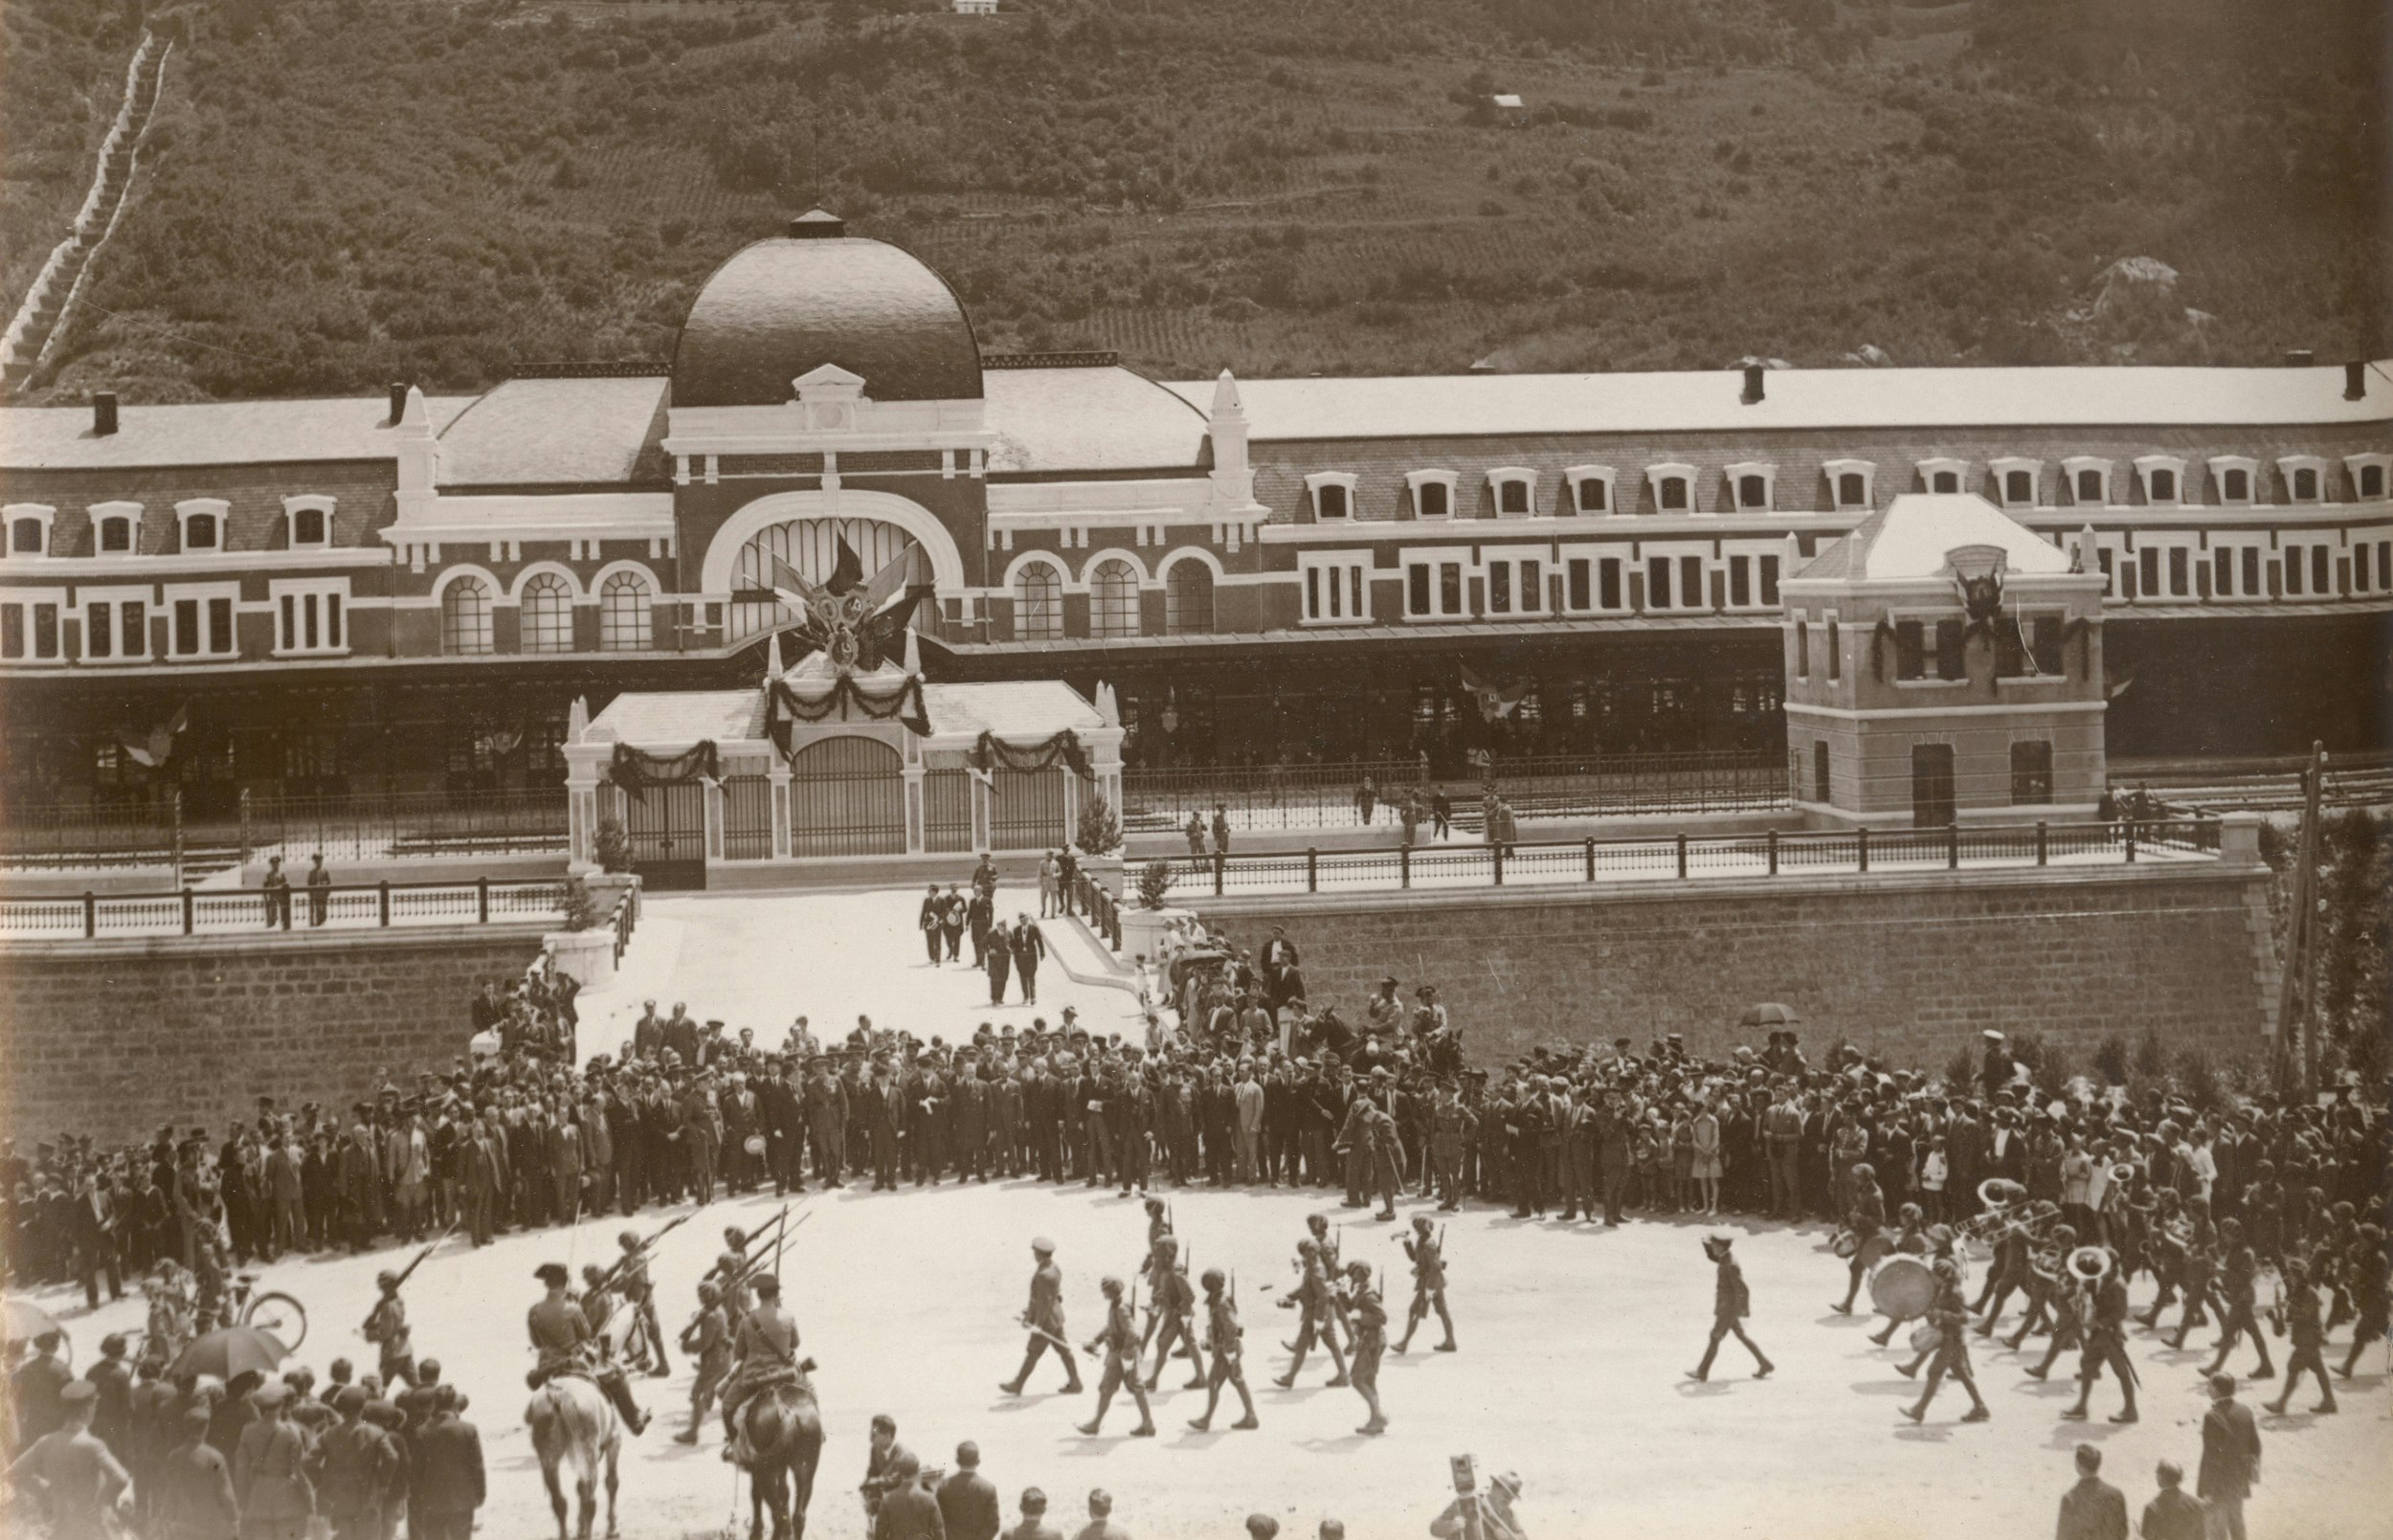 The Inauguration of the Canfranc International Railway Station by Alfonso XIII of Spain and Gaston Doumergue on July 28, 1928.